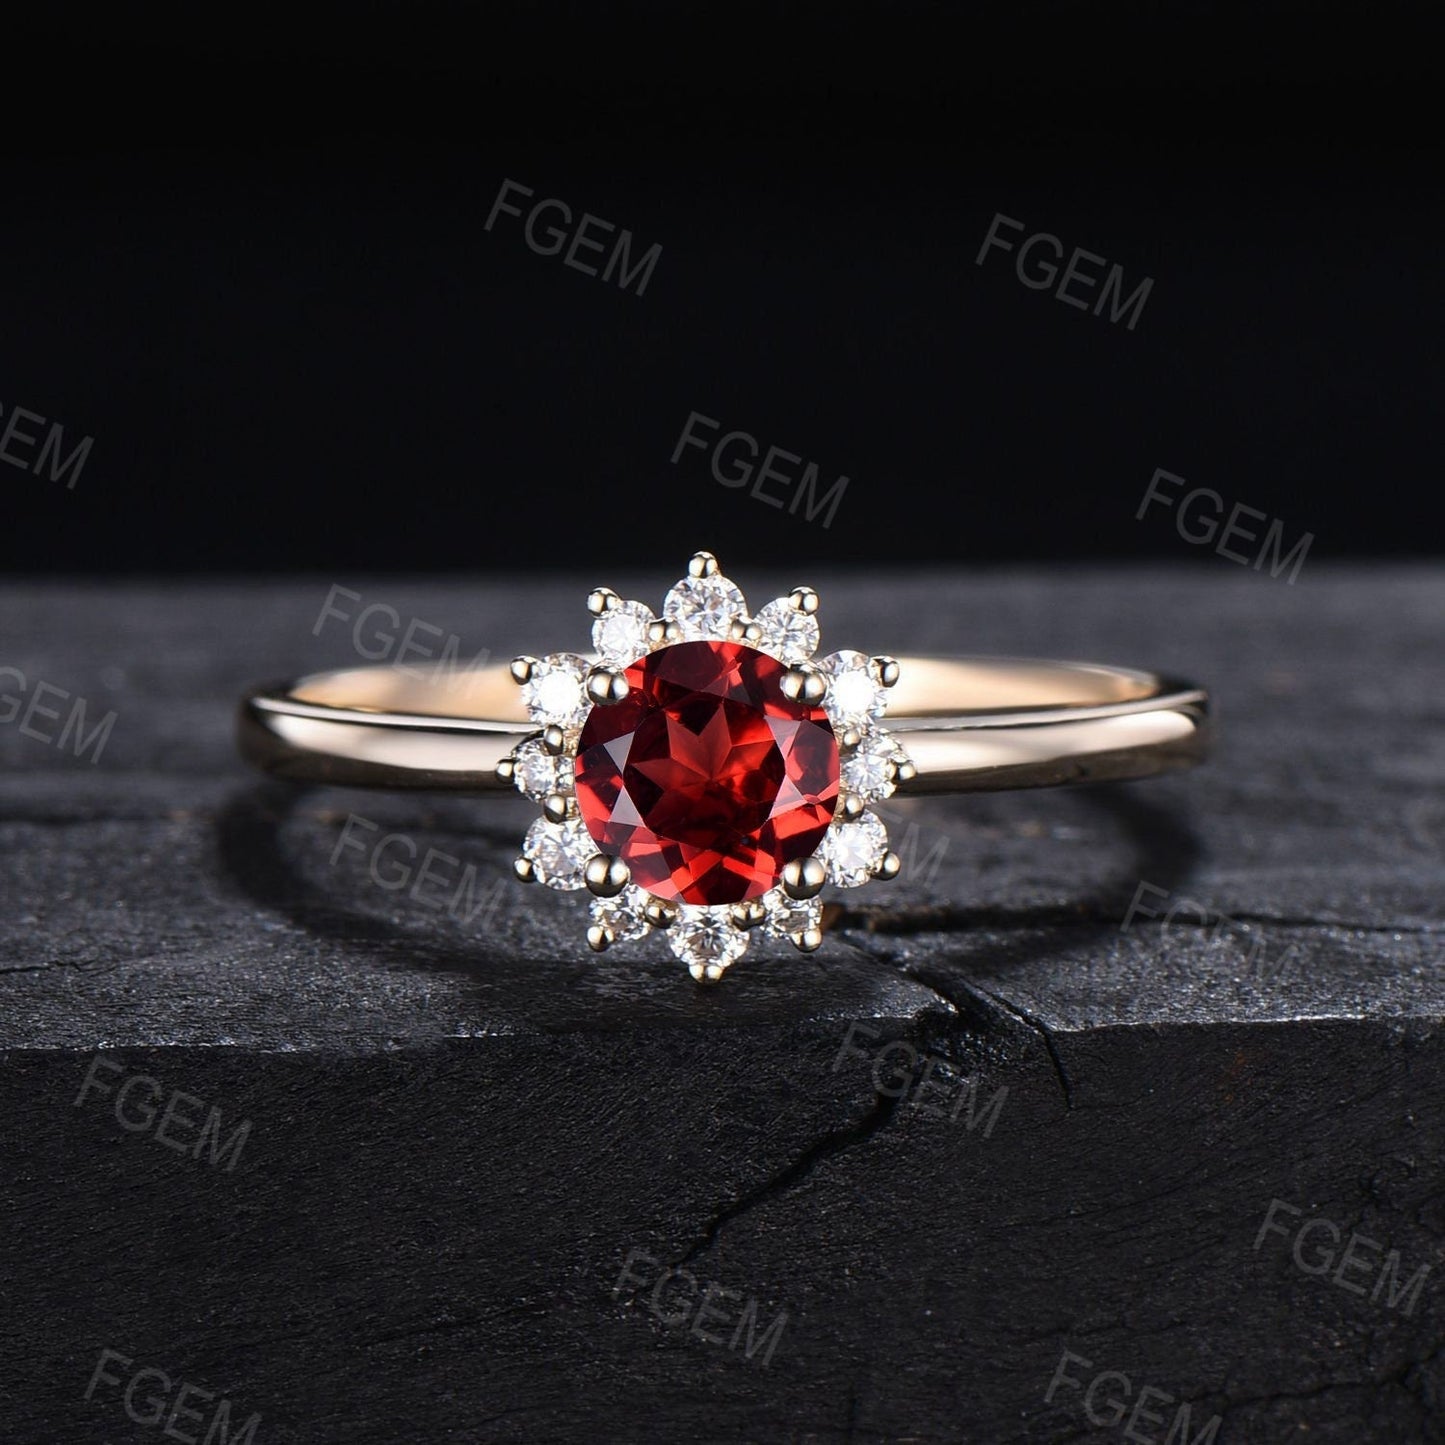 Nature Inspired Floral Ruby Halo Engagement Rings 10K Gold Round Red Wedding Ring July Birthstone Jewelry Unique Anniversary/Birthday Gift